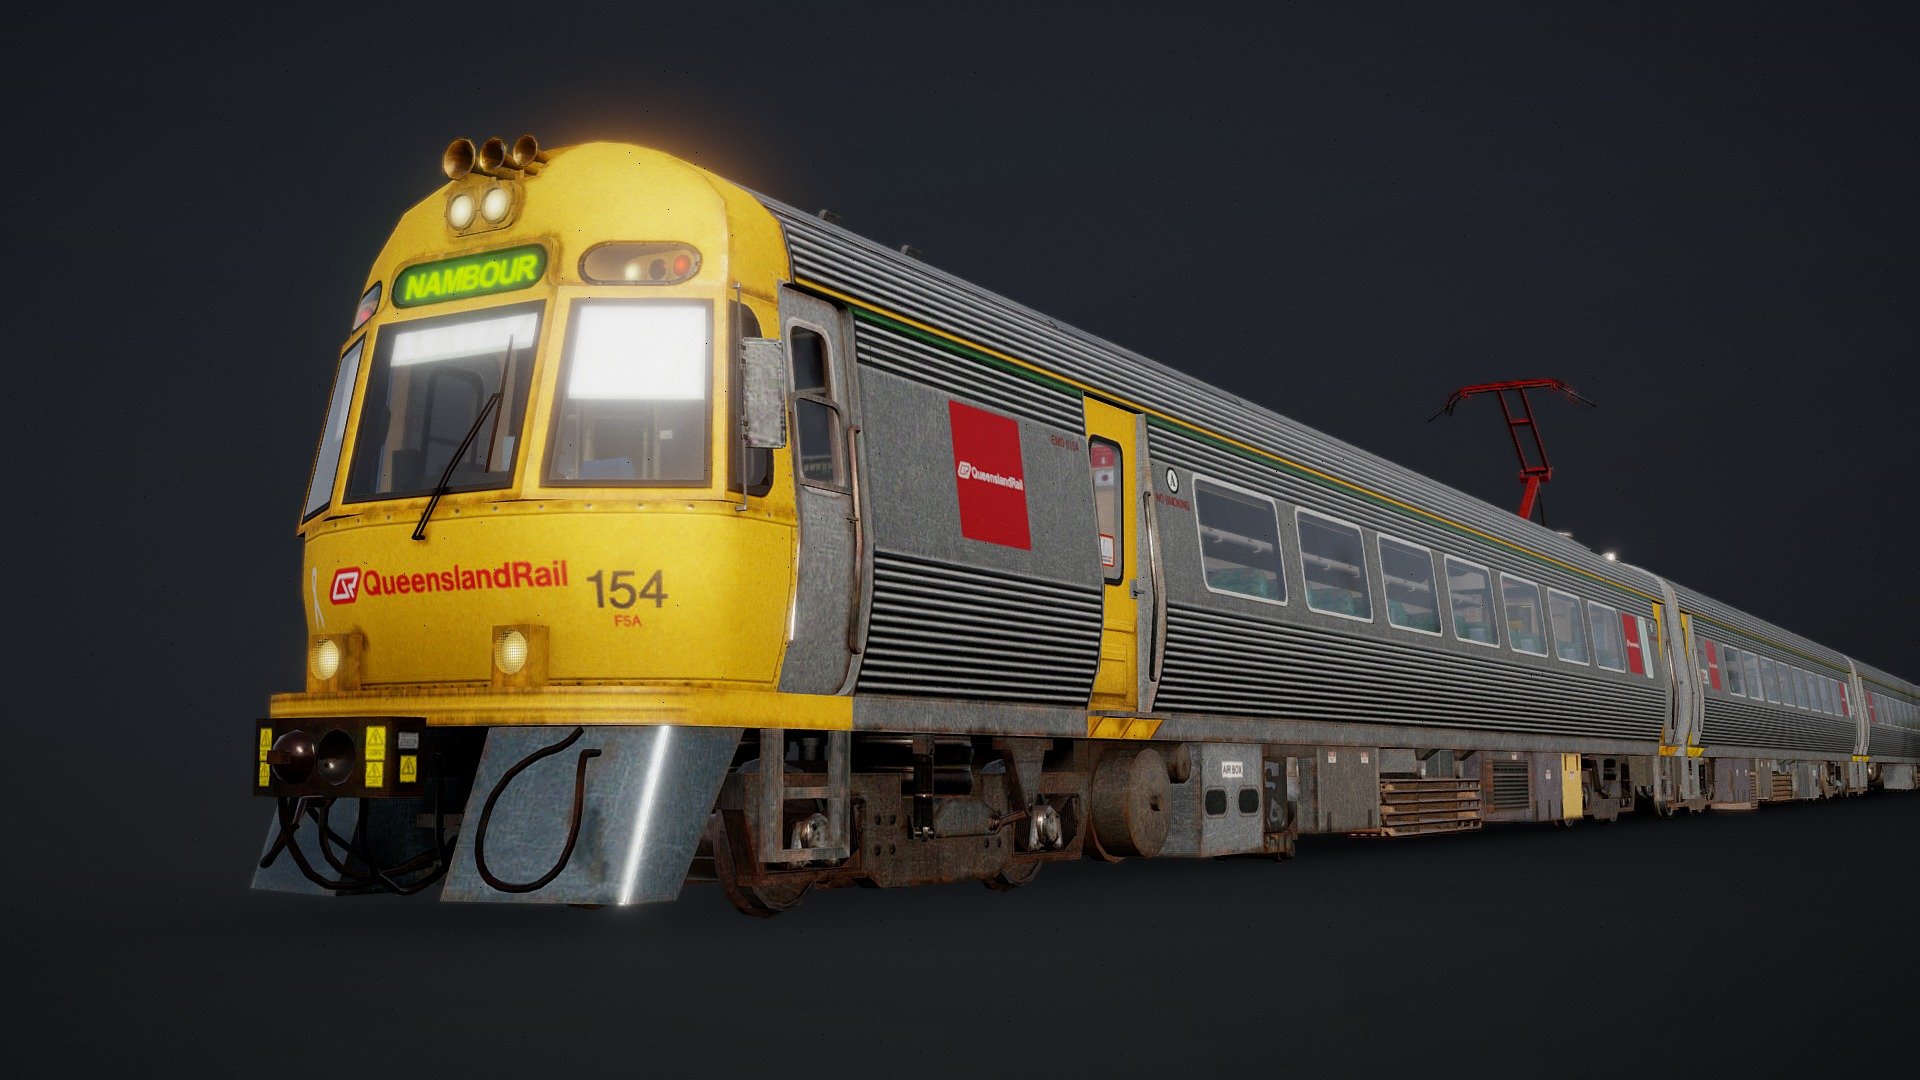 Queensland Rail InterCity Express made for the intention to be used in Transport Fever 2. Modelling started on the 21st of May 2023.

Update: 




30/10 added addition texture files for other liveries

29/10 added the EMT trailer carriage in 2010s livery and LOD models 

31/08 modelled the EMM trailer carriage 

Triva: The InterCity Express (QR ICE) was a class of electric multiple units built by Walkers, Maryborough, for Queensland Rail in 1987/89. Initially intended for the Spirit of Capricorn, a long-distance rail service, operated from 1988 to 2003 between Rockhampton and Brisbane. These trains were later repurposed for the Sunshine Coast line until mid-2021, when all units were retired being replaced by the New Generation Rollingstock.

Model Details
Textures: 4096x2048
LOD 1 Textures: 1024x1024 

EMD: 64646 [lod0] / 1736 [lod1]
EMM: 51412 [lod0] / 928 [lod1] 
EMT: 48378 [lod0] / 918 [lod1] 

Transport Fever 2 Link: https://steamcommunity.com/sharedfiles/filedetails/?id=3033544417 - Queensland Rail ICE (InterCity Express) Train - Buy Royalty Free 3D model by Jotrain 3d model